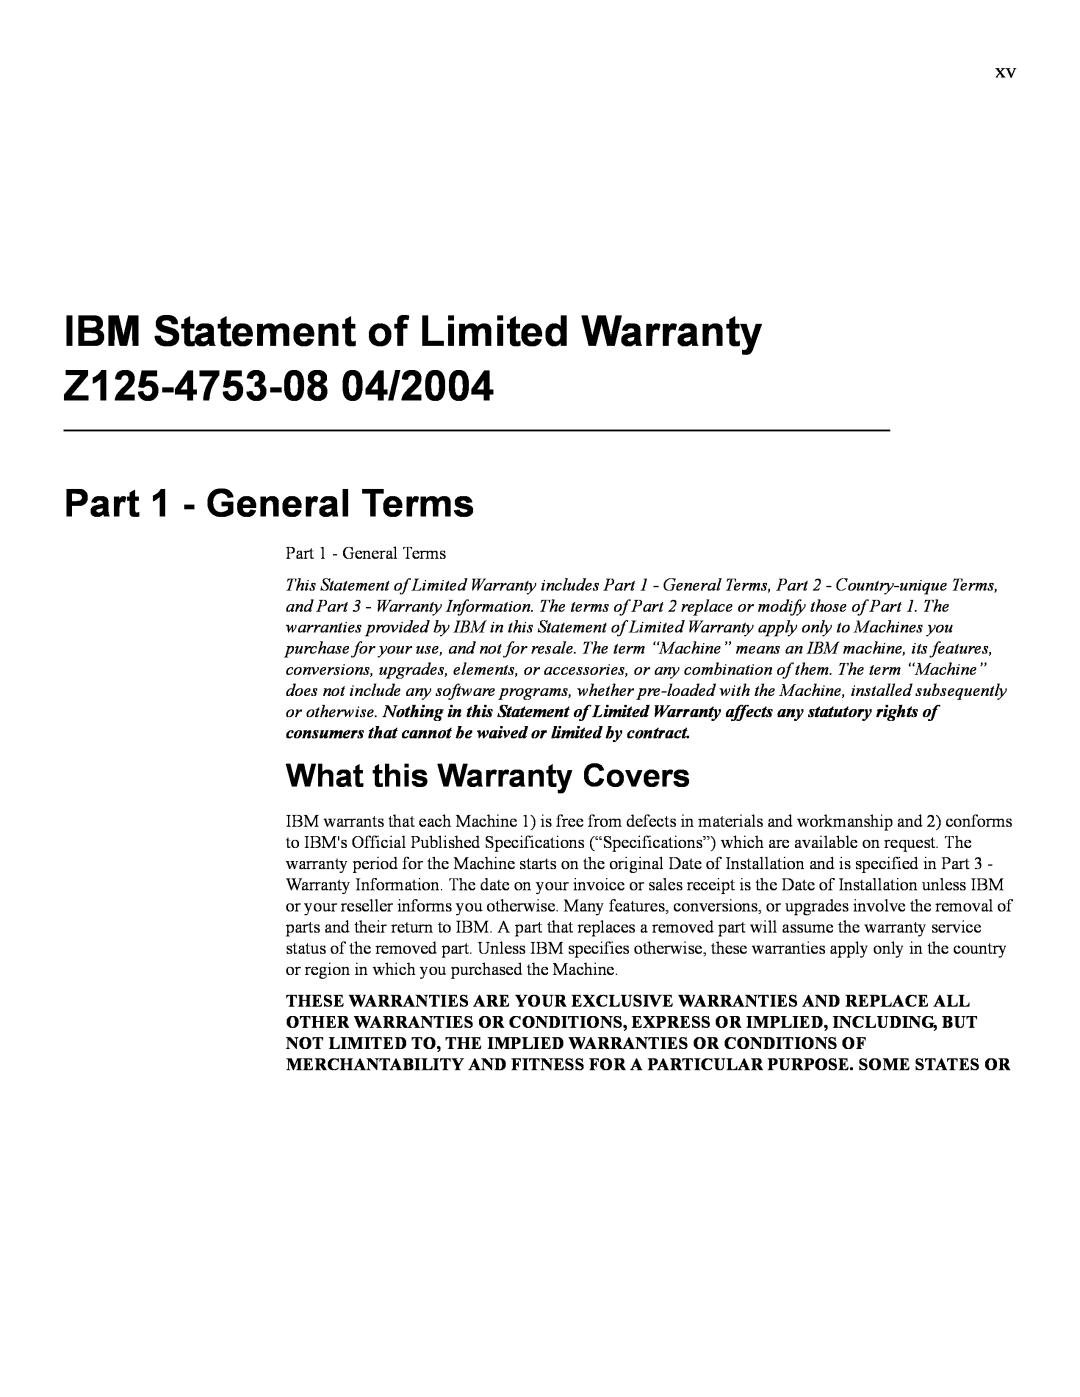 IBM 24R9718 IB IBM Statement of Limited Warranty Z125-4753-08 04/2004, Part 1 - General Terms, What this Warranty Covers 